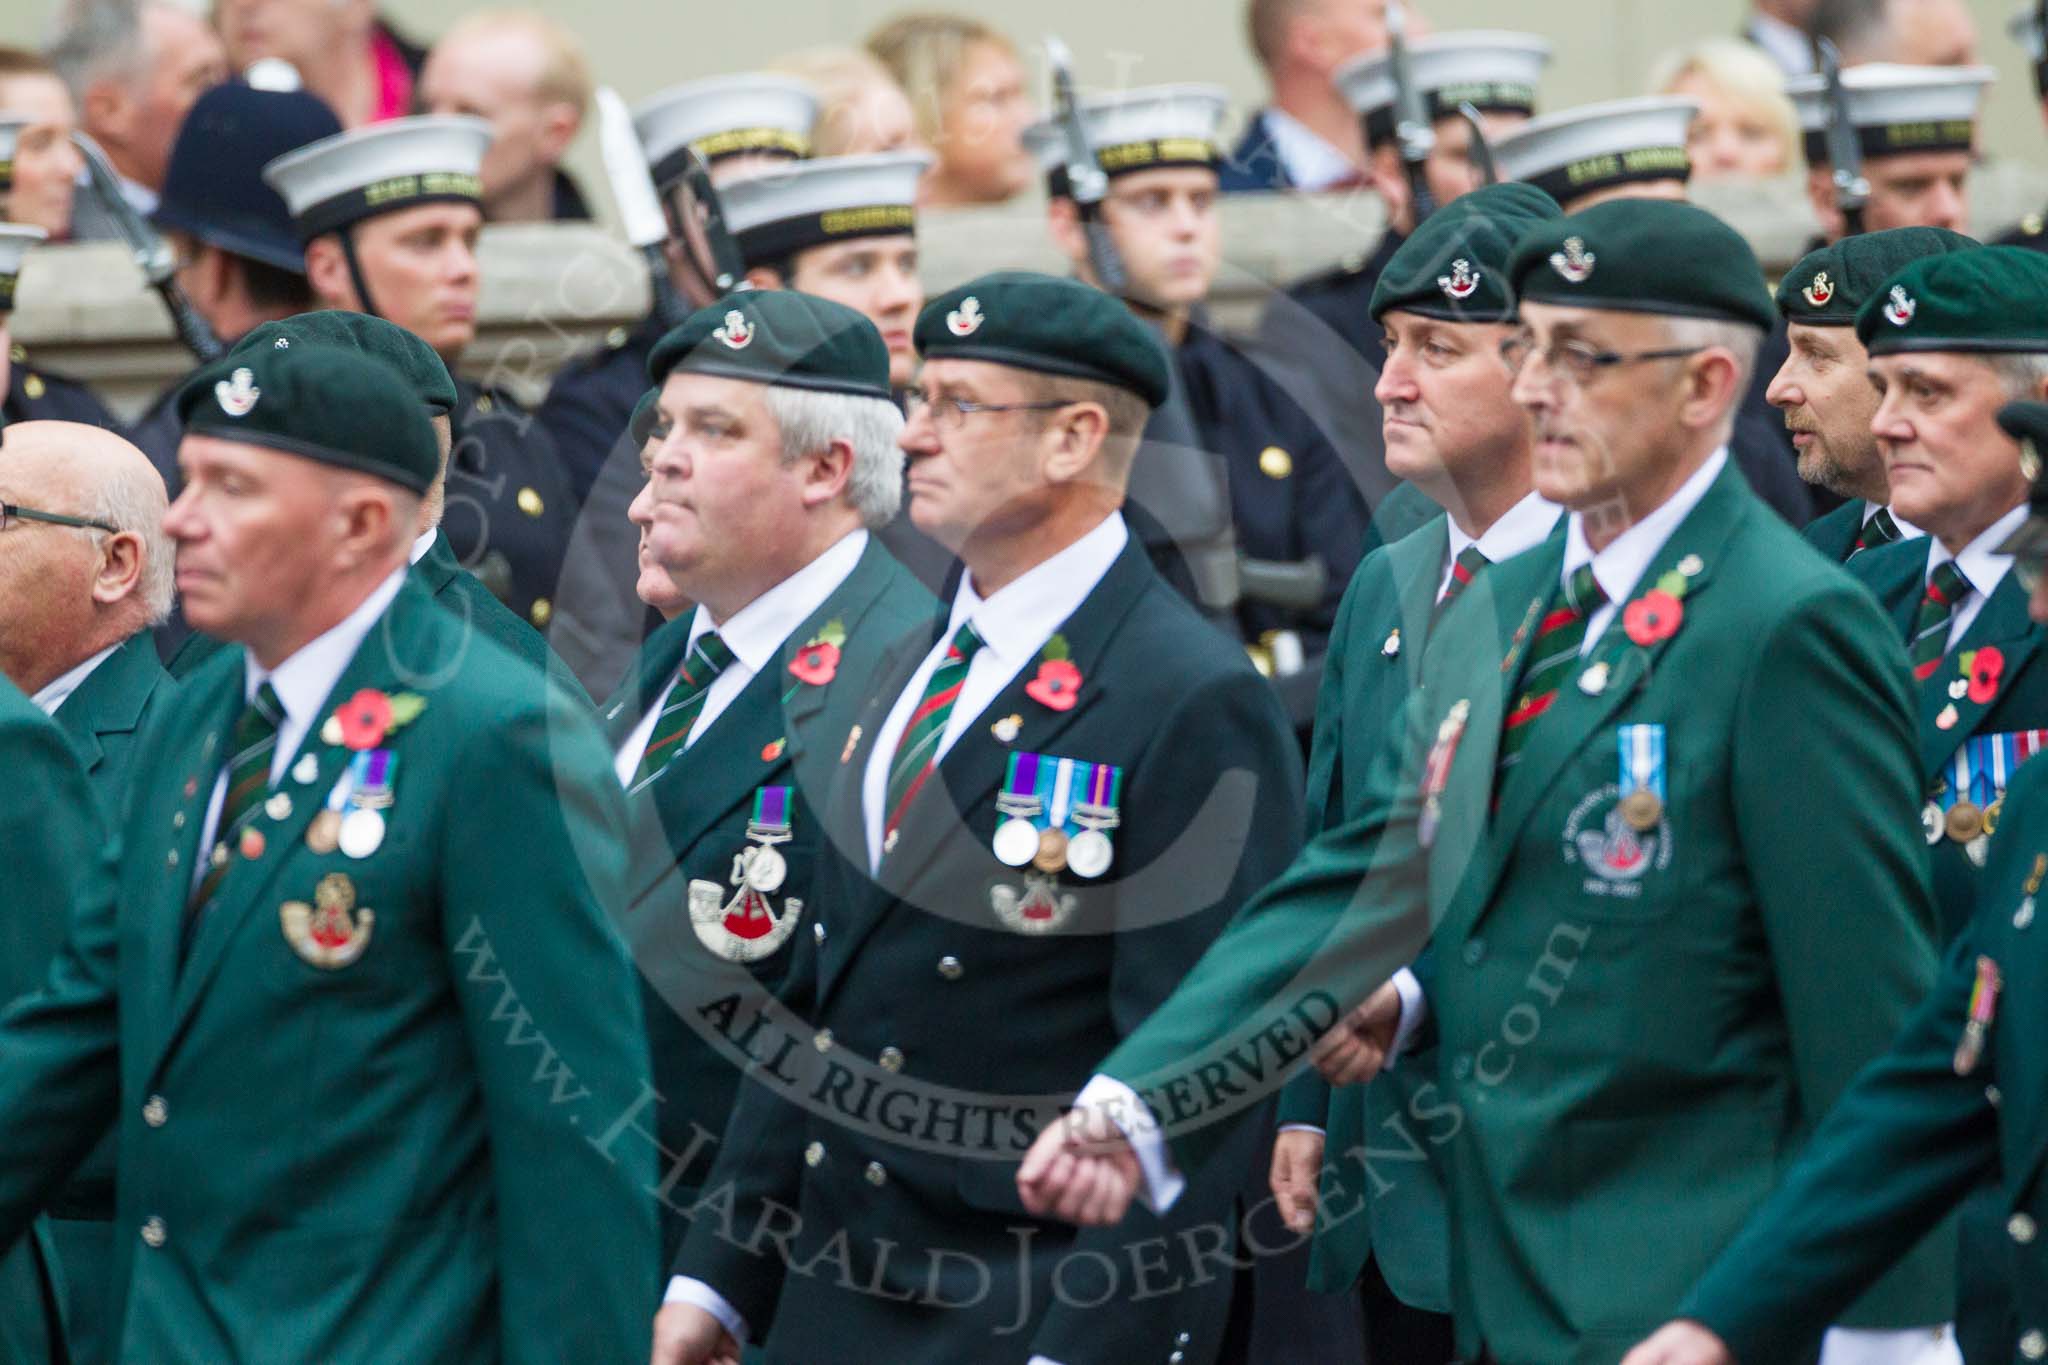 Remembrance Sunday at the Cenotaph 2015: Group A1, 1LI Association.
Cenotaph, Whitehall, London SW1,
London,
Greater London,
United Kingdom,
on 08 November 2015 at 12:07, image #1151